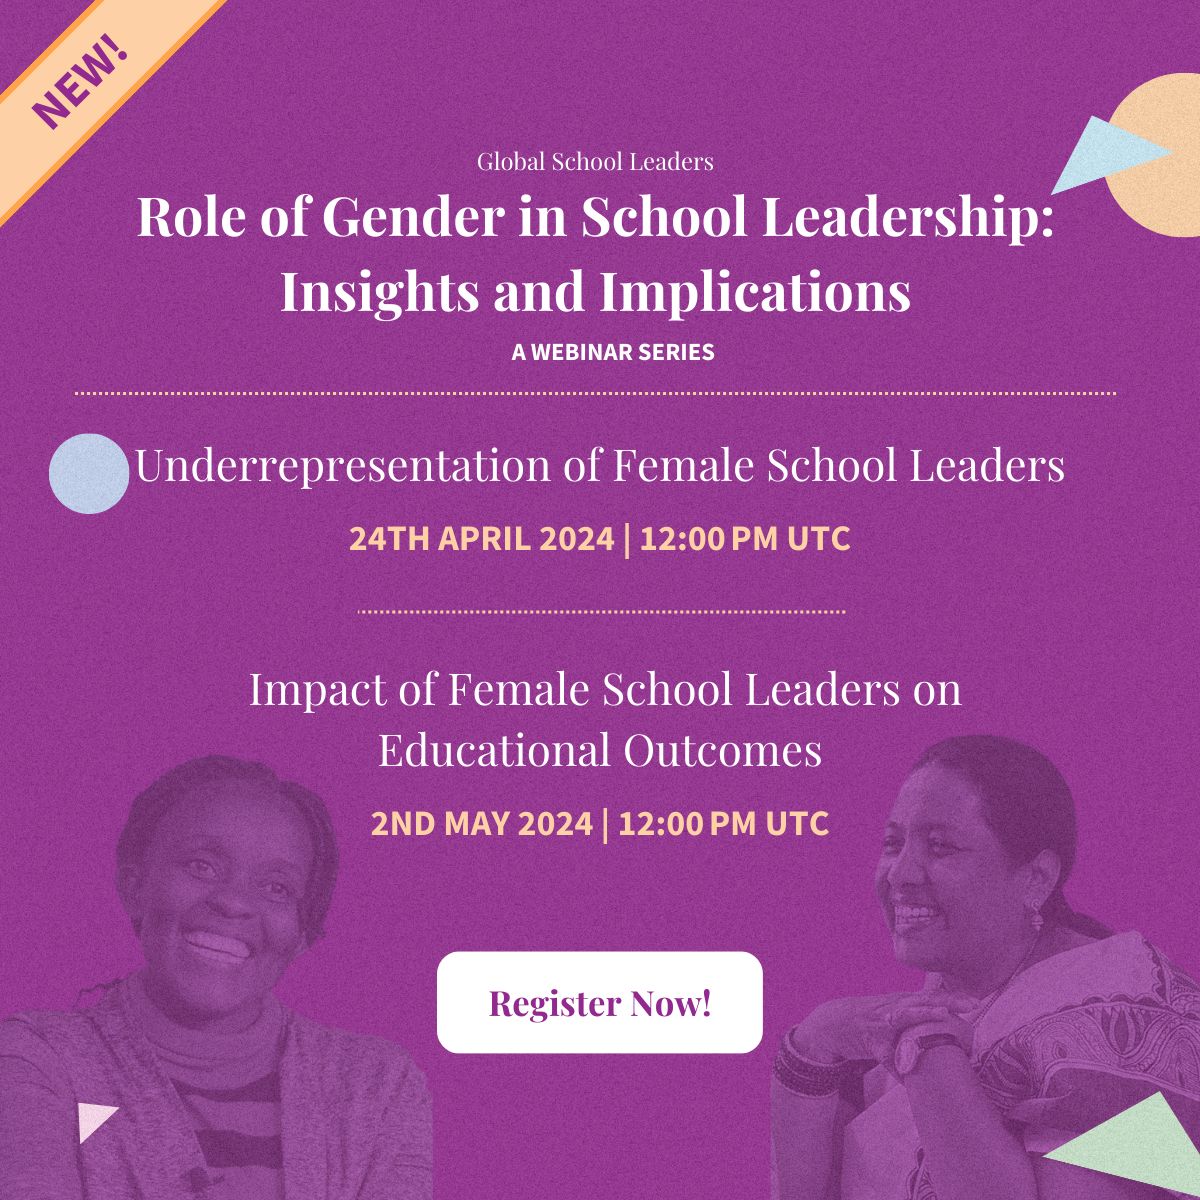 📢Excited to announce our webinar series, “Role of Gender in School Leadership: Insights and Implications,” based on our 2024 Evidence Review Join us to explore the impact of female school leadership & strategies to enhance gender equity! 📅24th April & 2nd May, 12:00 PM UTC